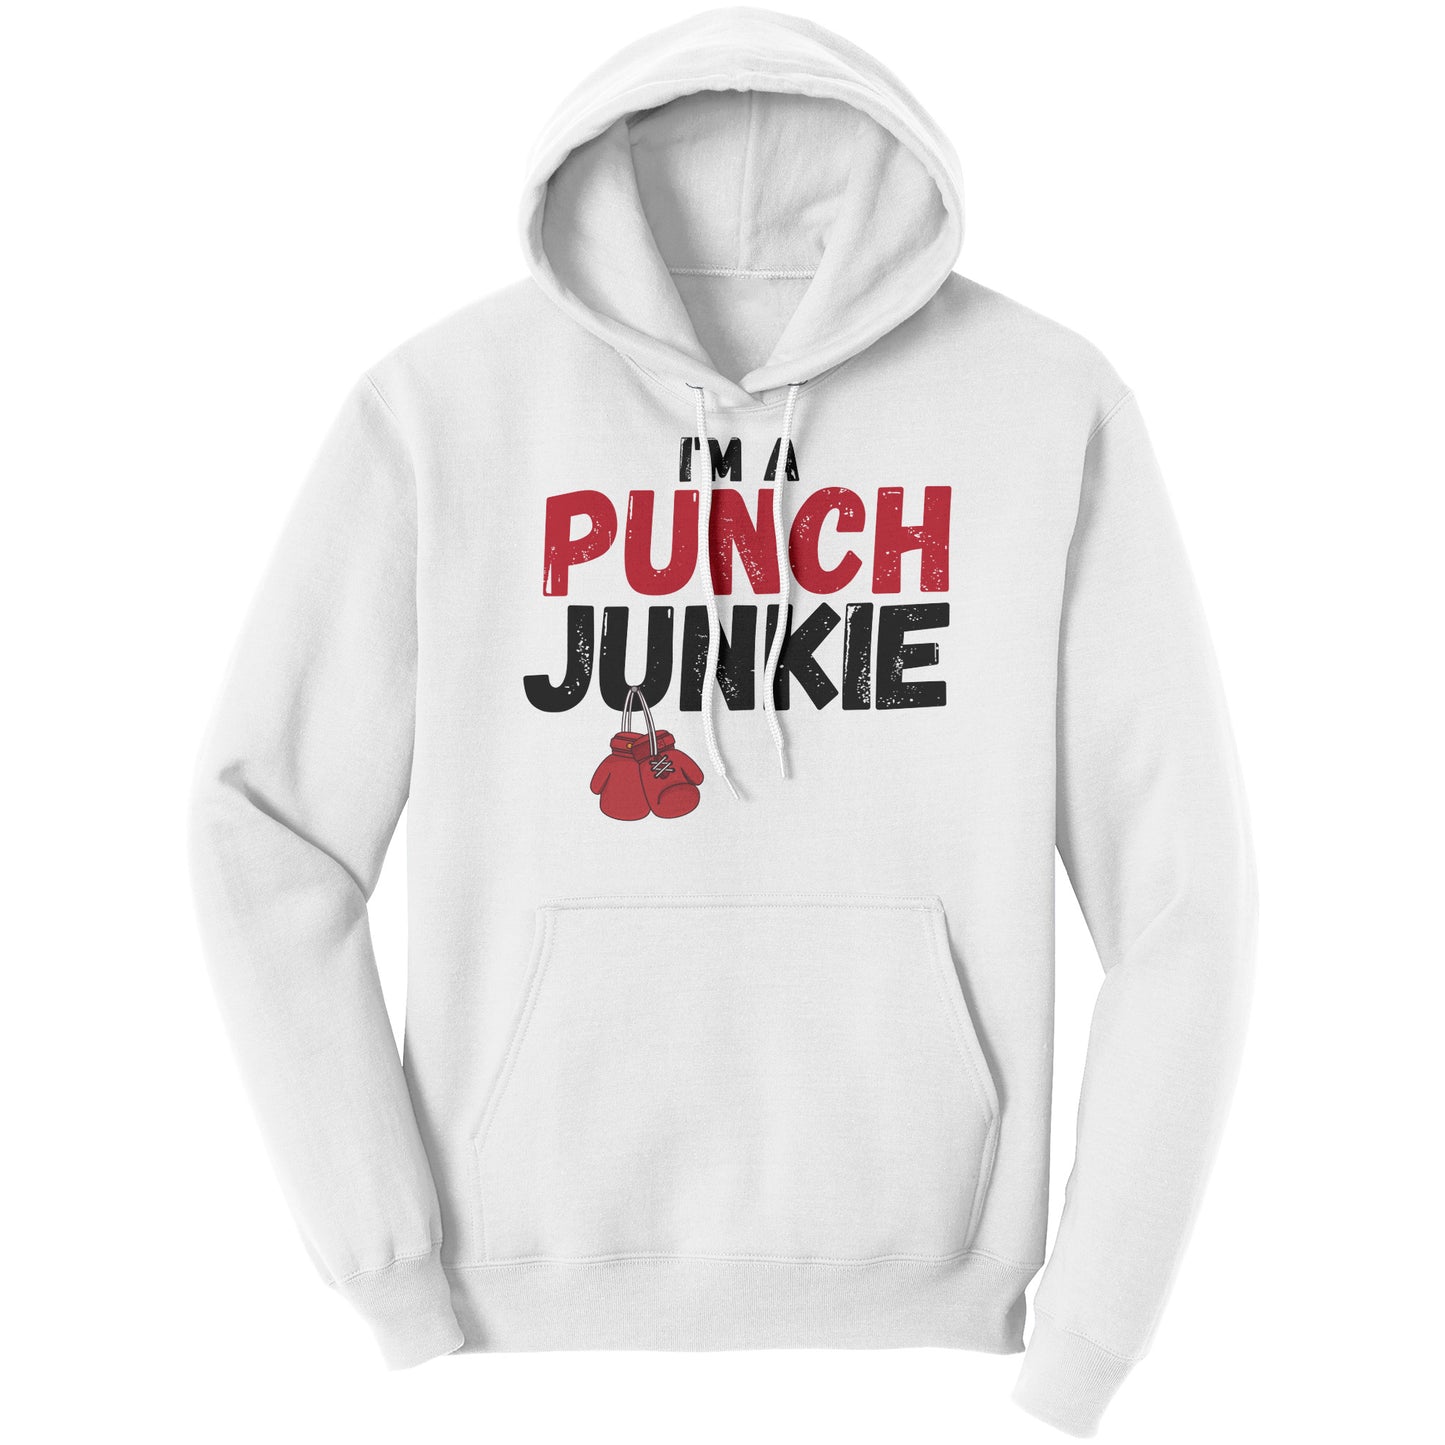 The "I'm A Punch Junkie" Hoodie